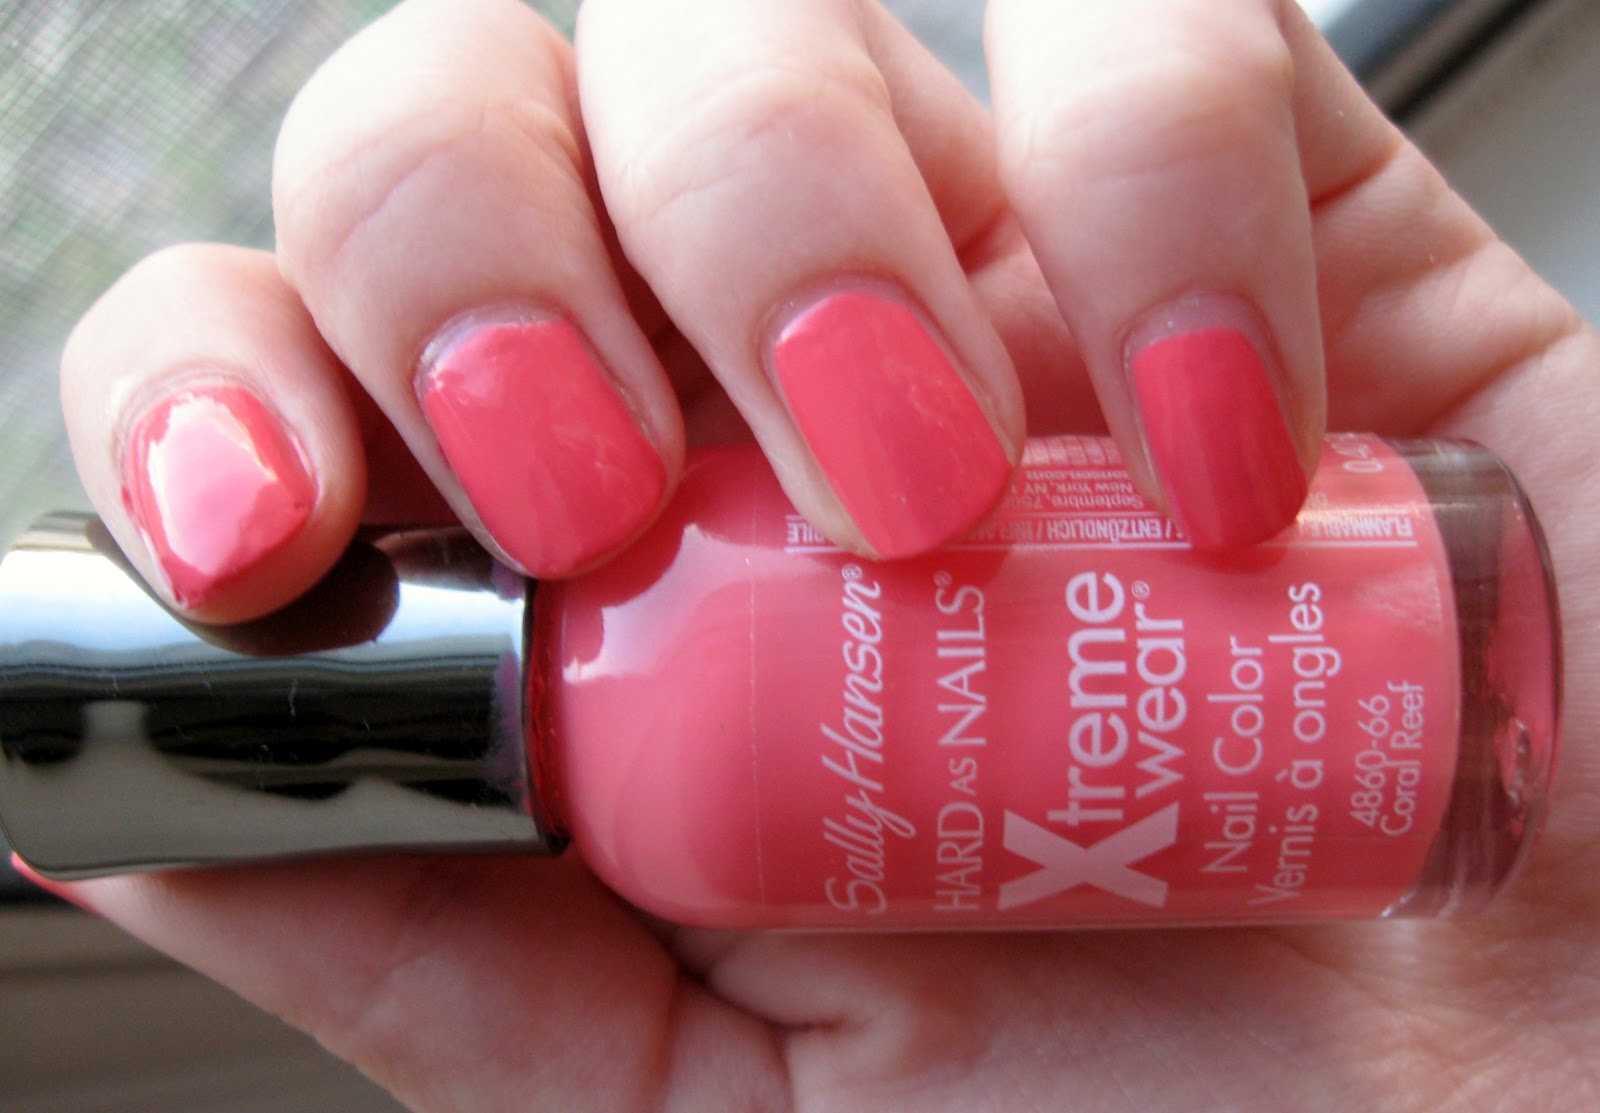 10. Sally Hansen Hard as Nails Xtreme Wear in "Coral Reef" - wide 4